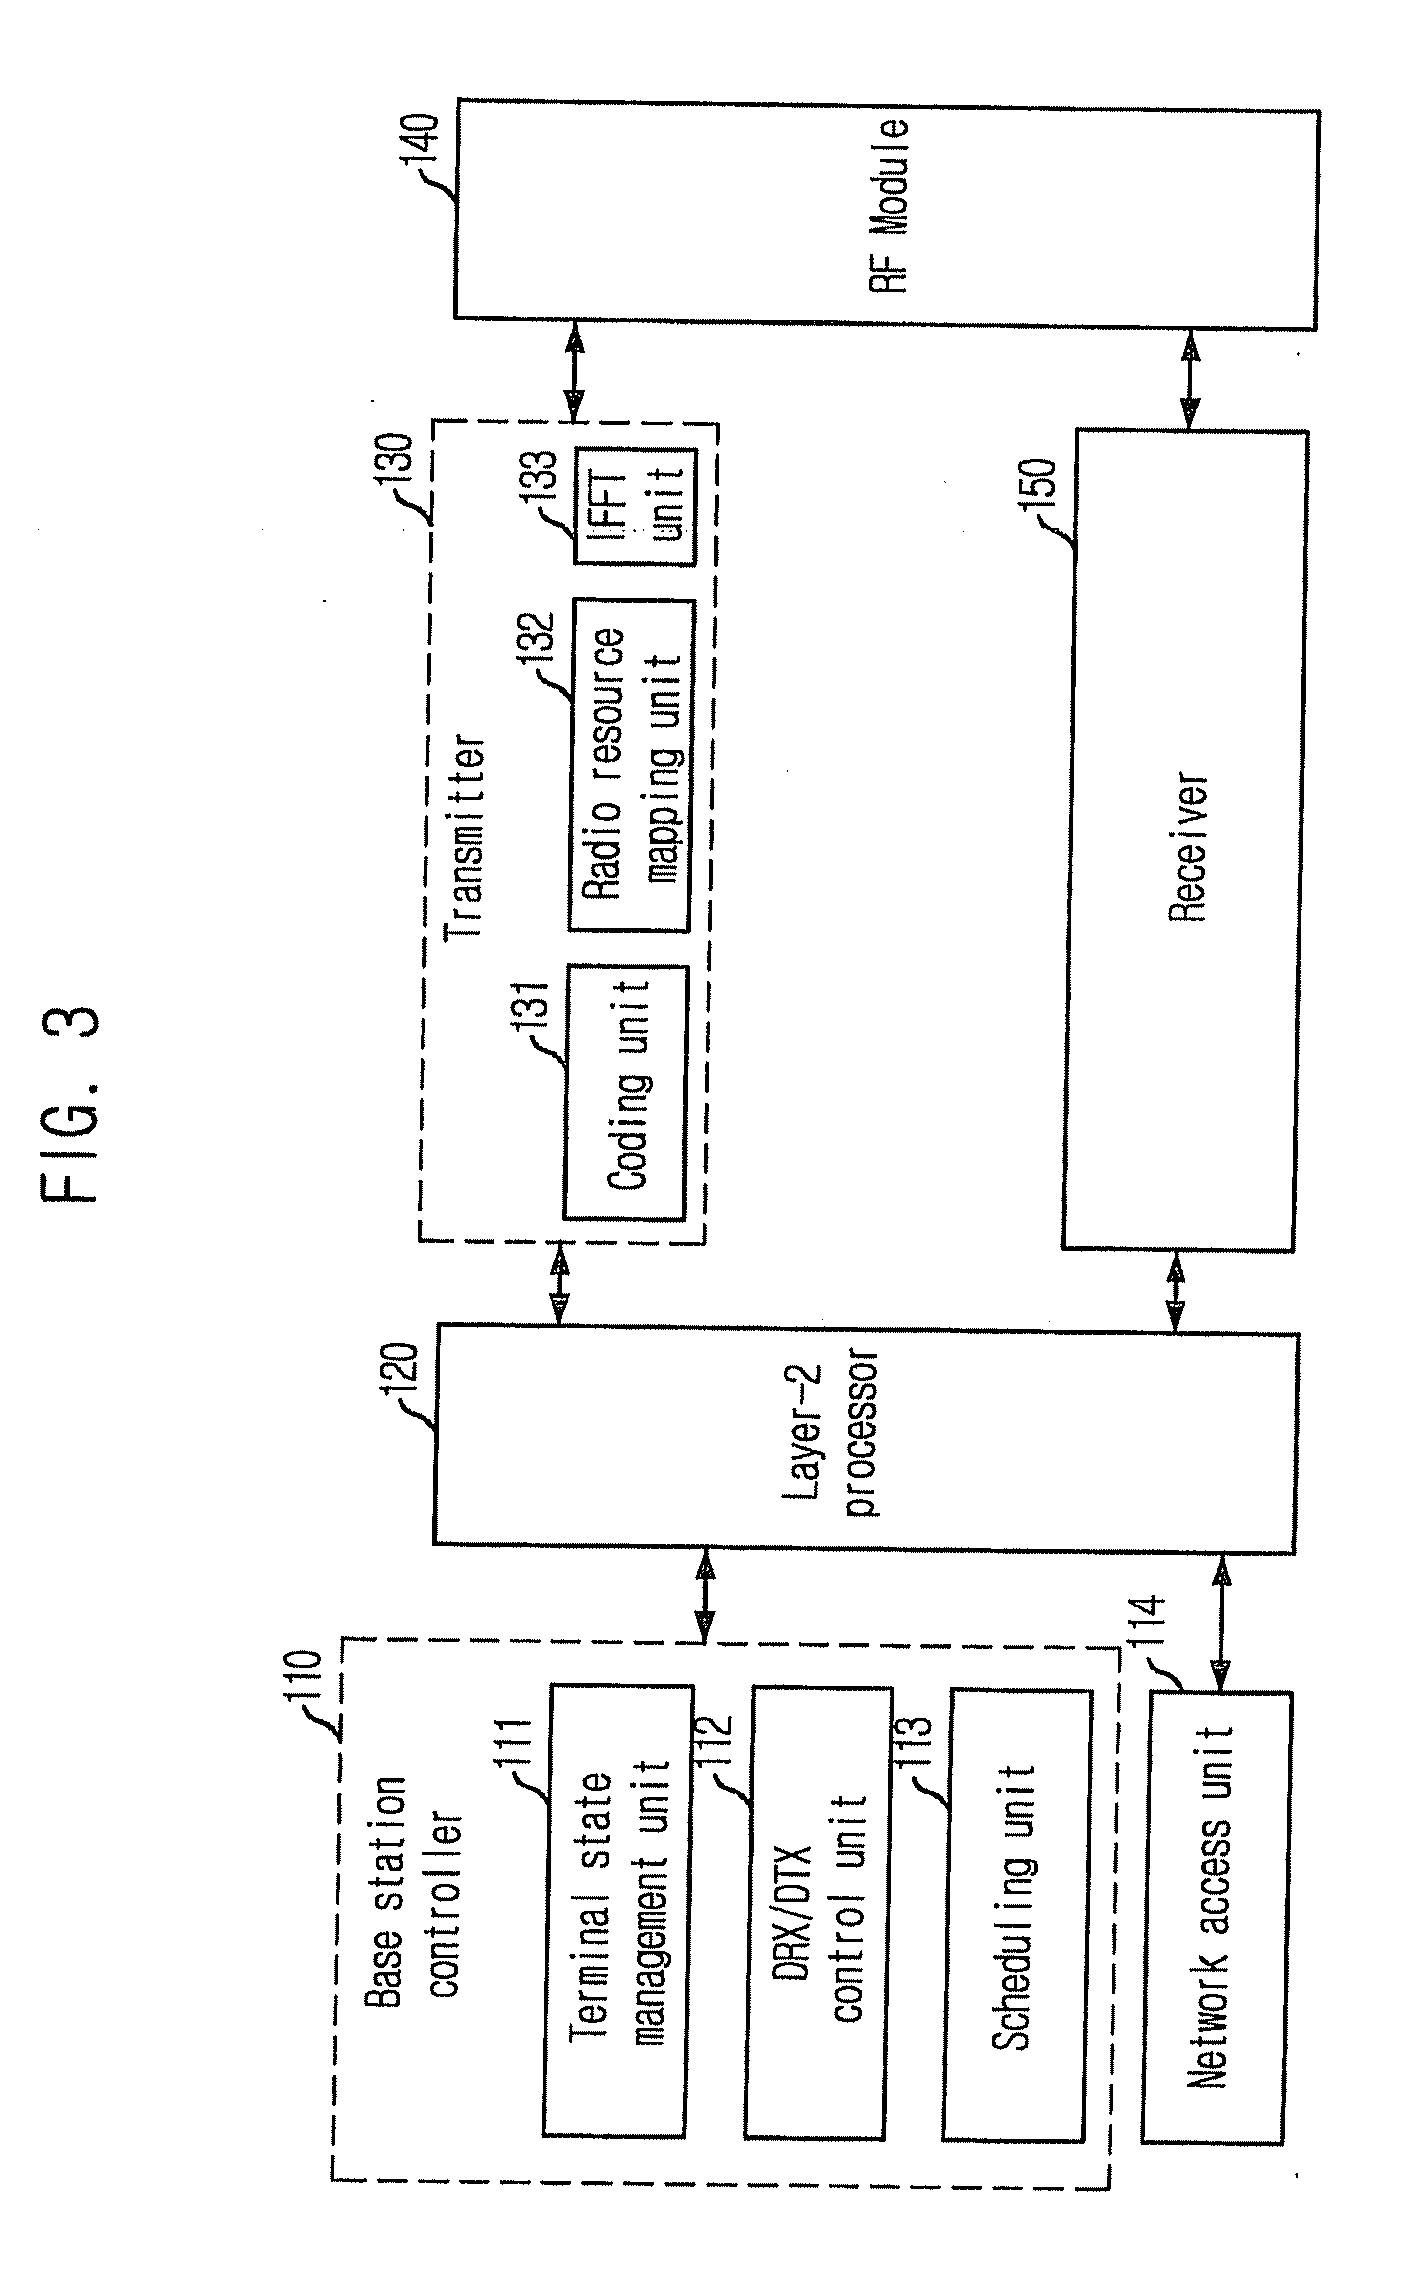 Method and apparatus for discontinuous transmission/reception operation for reducing power consumption in cellular system